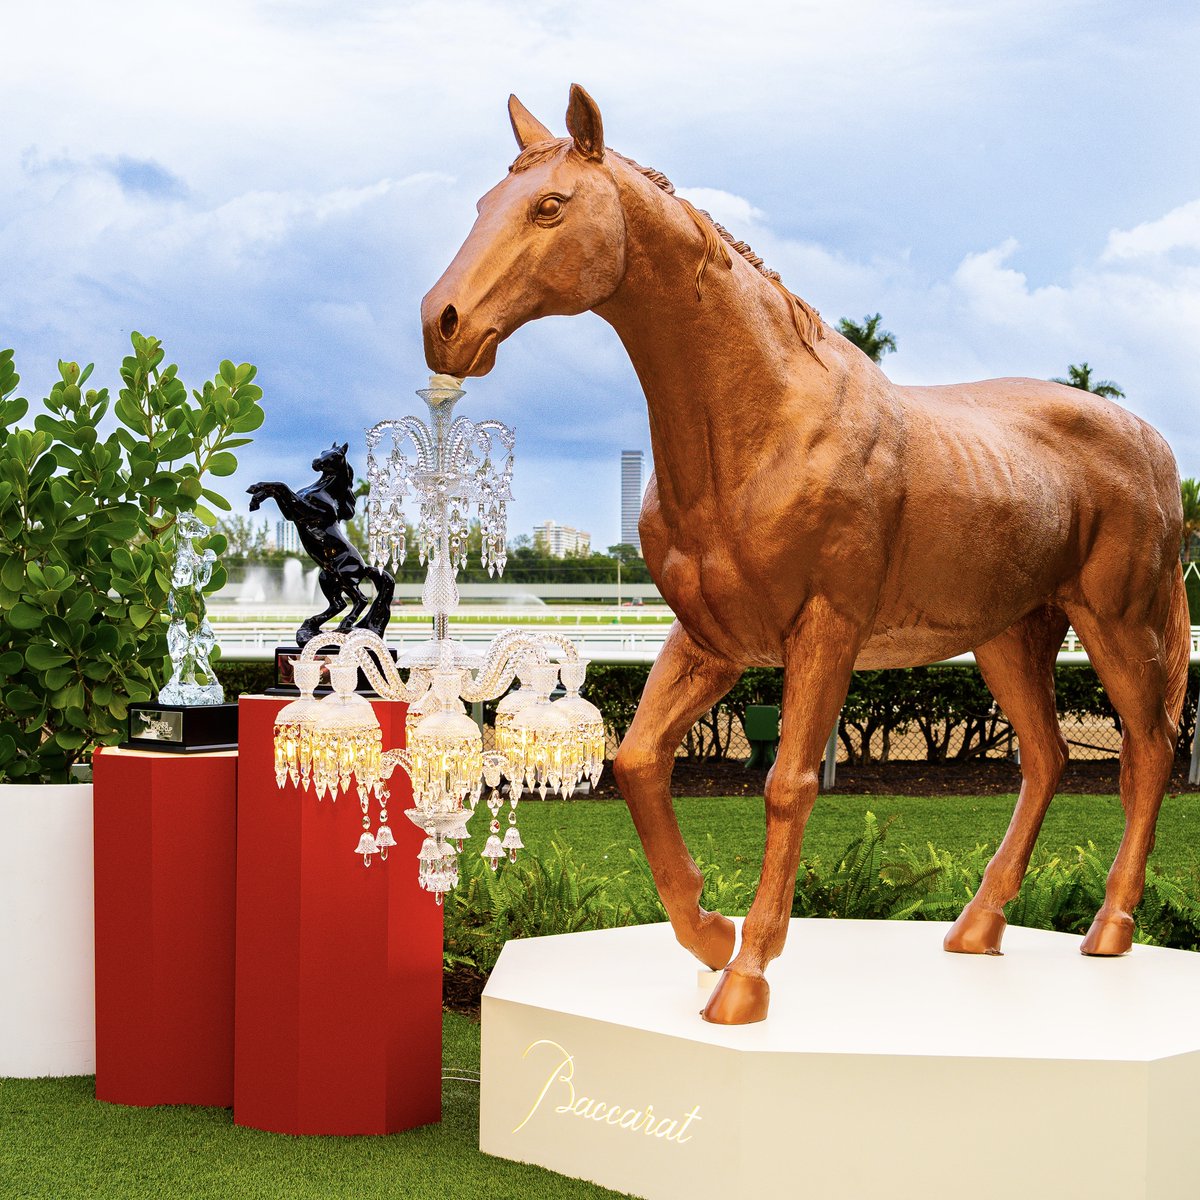 BACCARAT x PEGASUS WORLD CUP 2024 Returning to the @PegasusWorldCup as presenting sponsor for 2024, @Baccarat unveils the exclusive #Baccarat Garden at Carousel Club. The lavish desert oasis-inspired enclave provided an unparalleled viewing experience for exclusive guests.